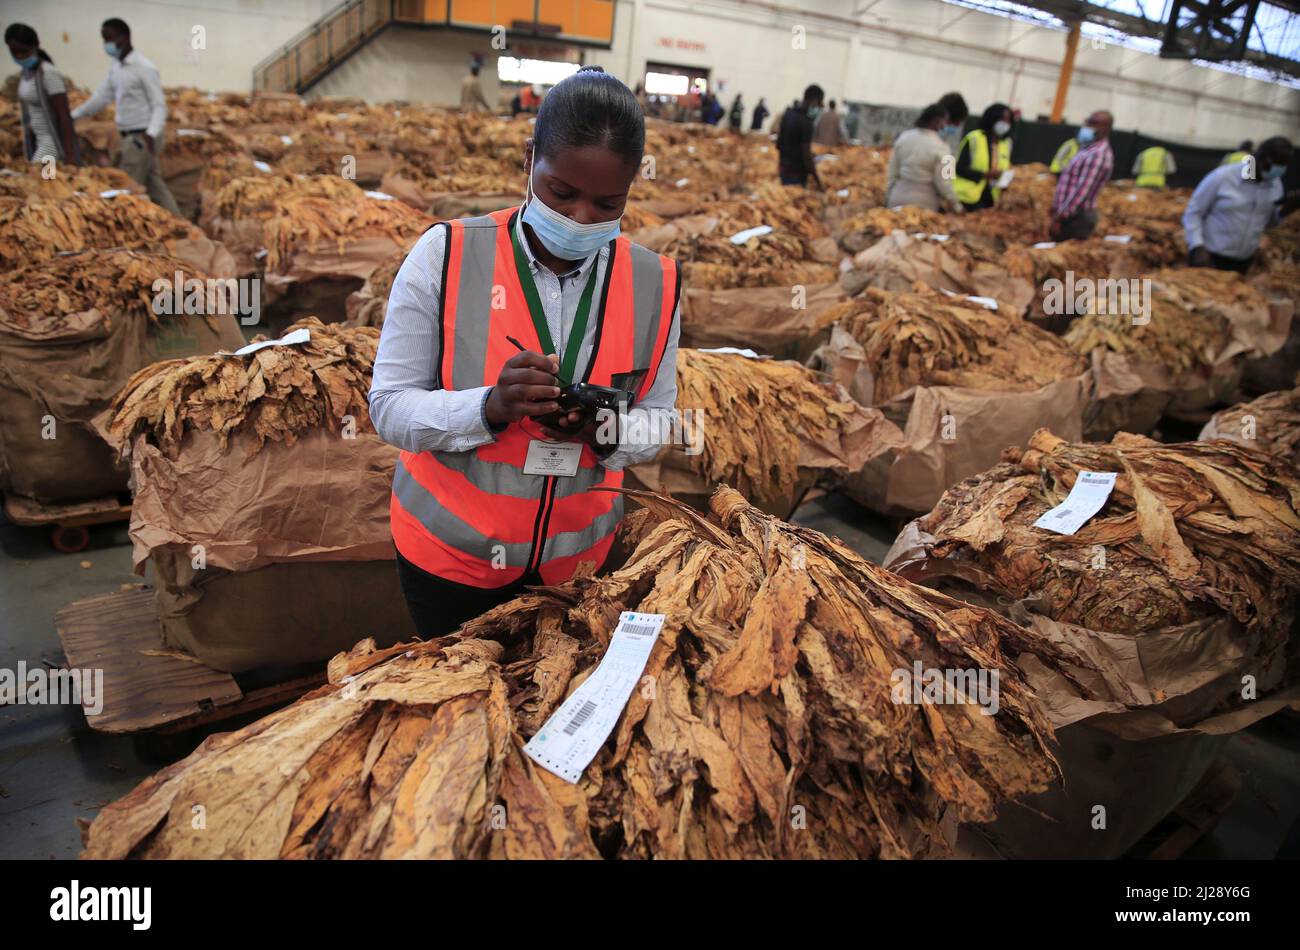 Harare, Zimbabwe. 30th Mar, 2022. A sales floor employee takes records of tobacco crops on the opening day of Zimbabwe's tobacco auction season at Tobacco Sales Floor in Harare, Zimbabwe, on March 30, 2022. Zimbabwe's 2022 tobacco auction season officially opened Wednesday with good quality tobacco leaf expected this year. Credit: Shaun Jusa/Xinhua/Alamy Live News Stock Photo